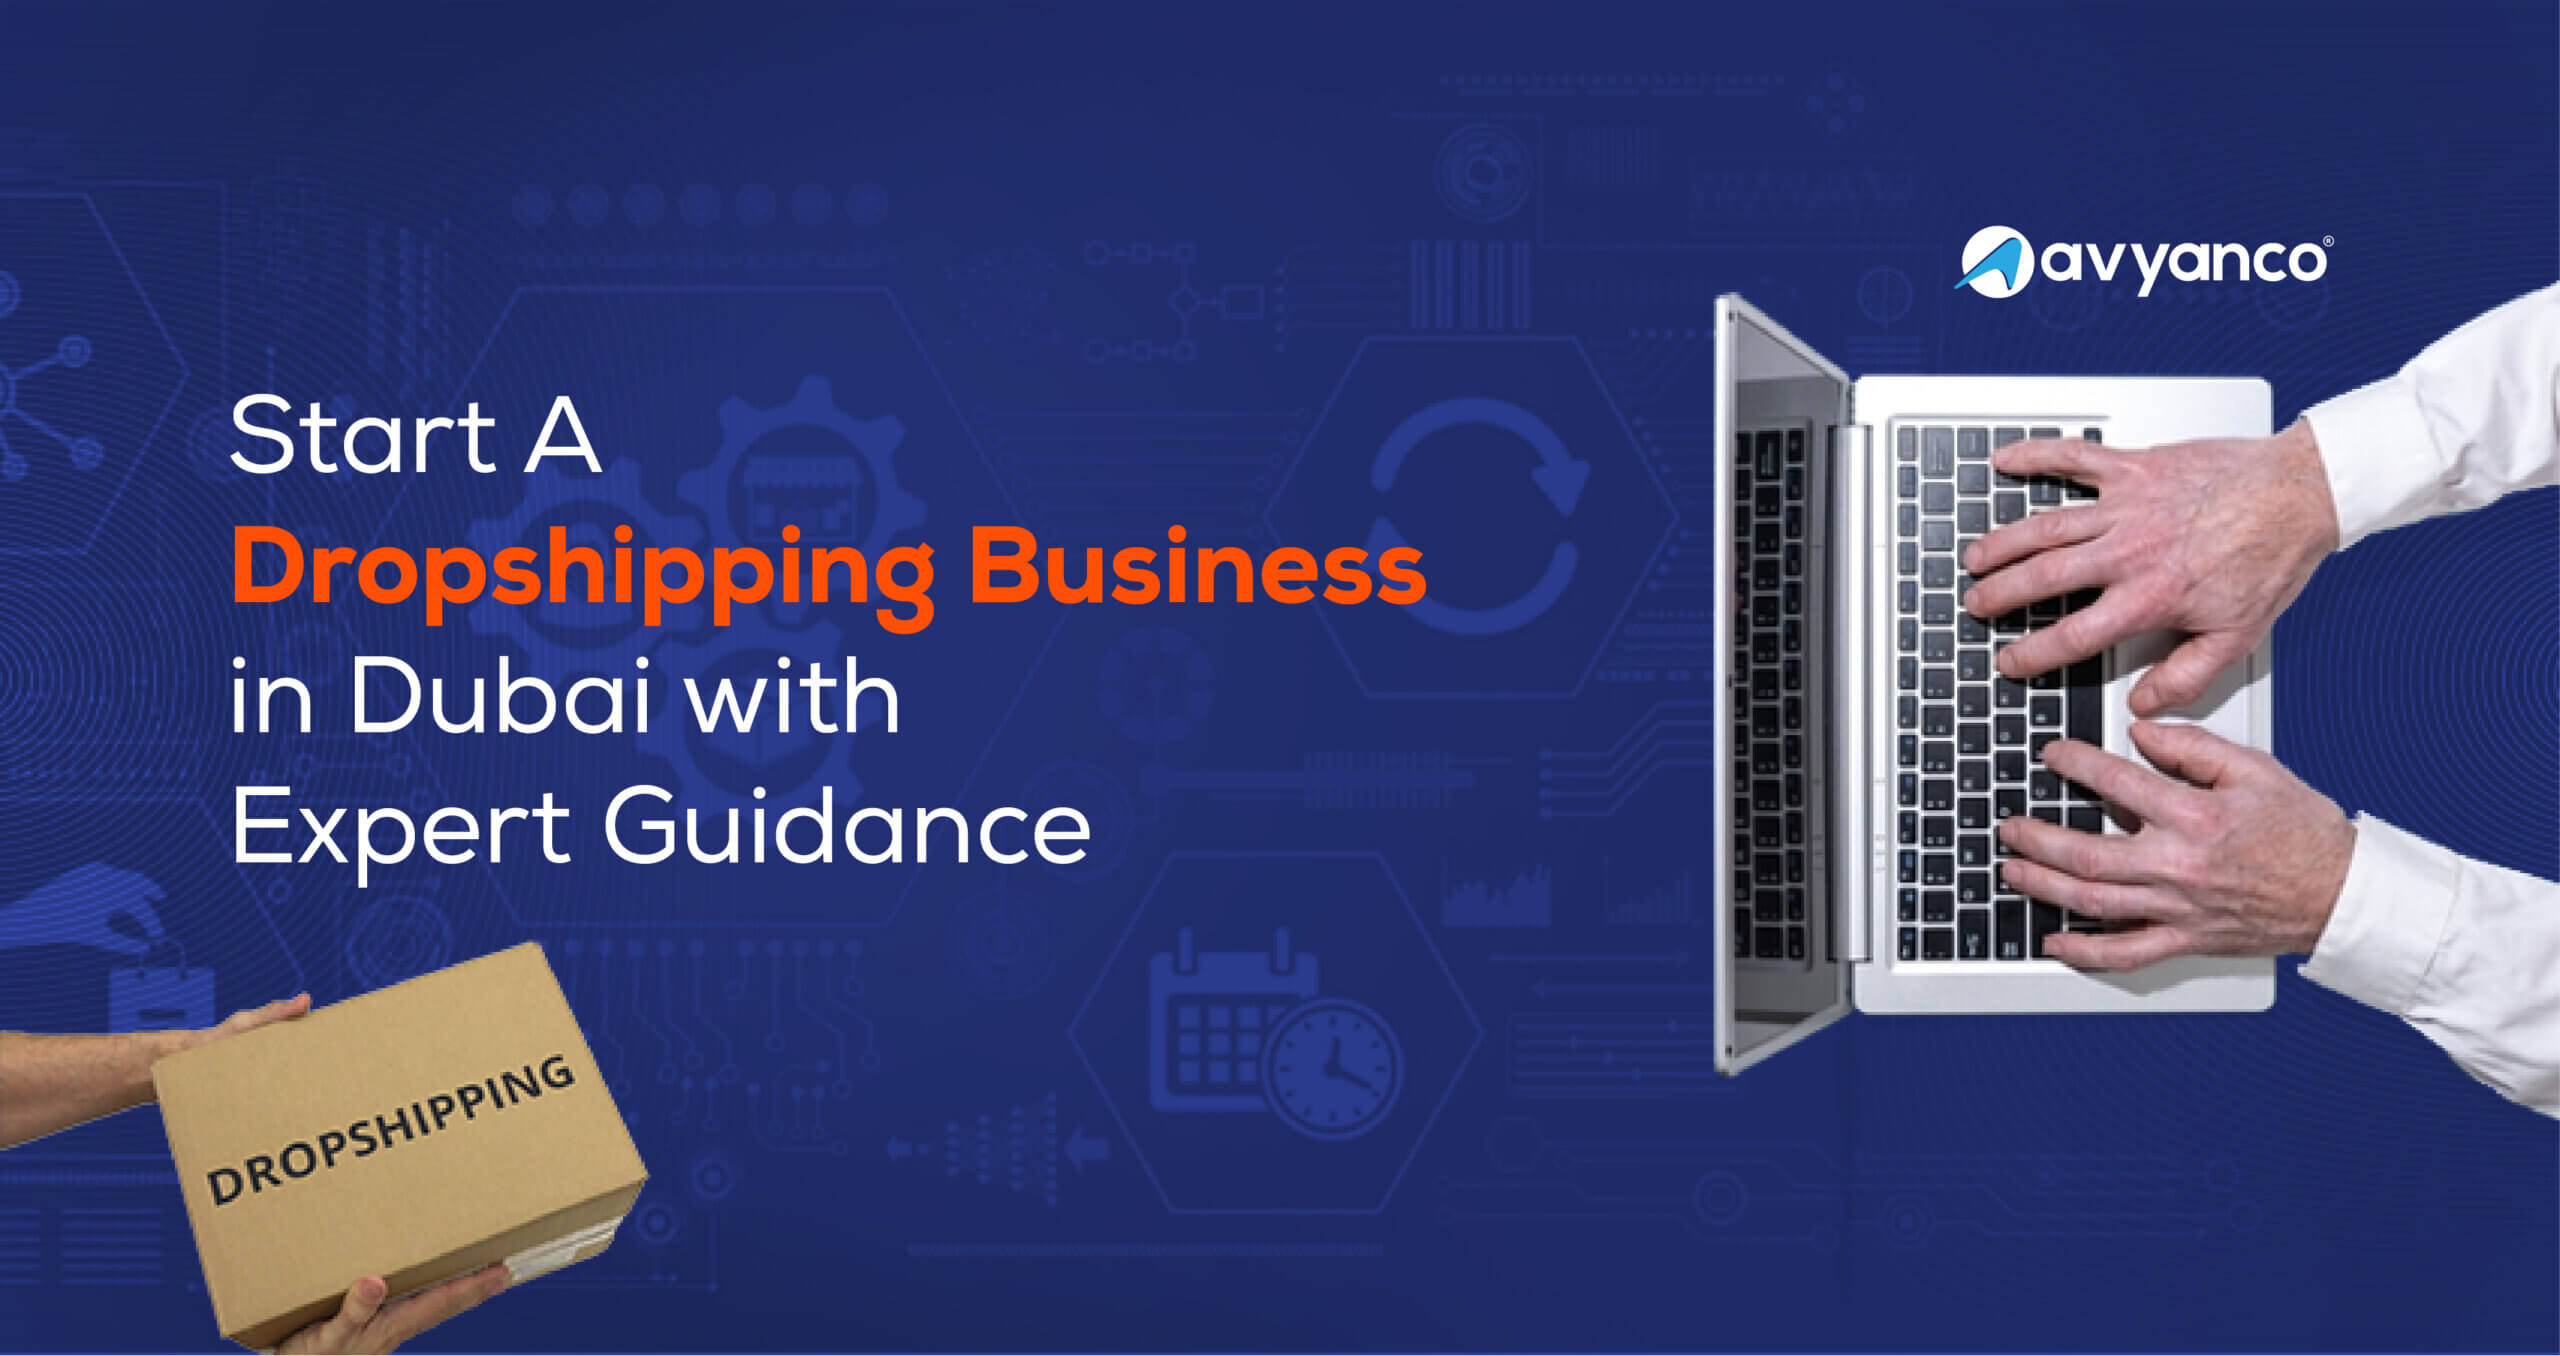 How to Start a Dropshipping Business in Dubai, UAE?